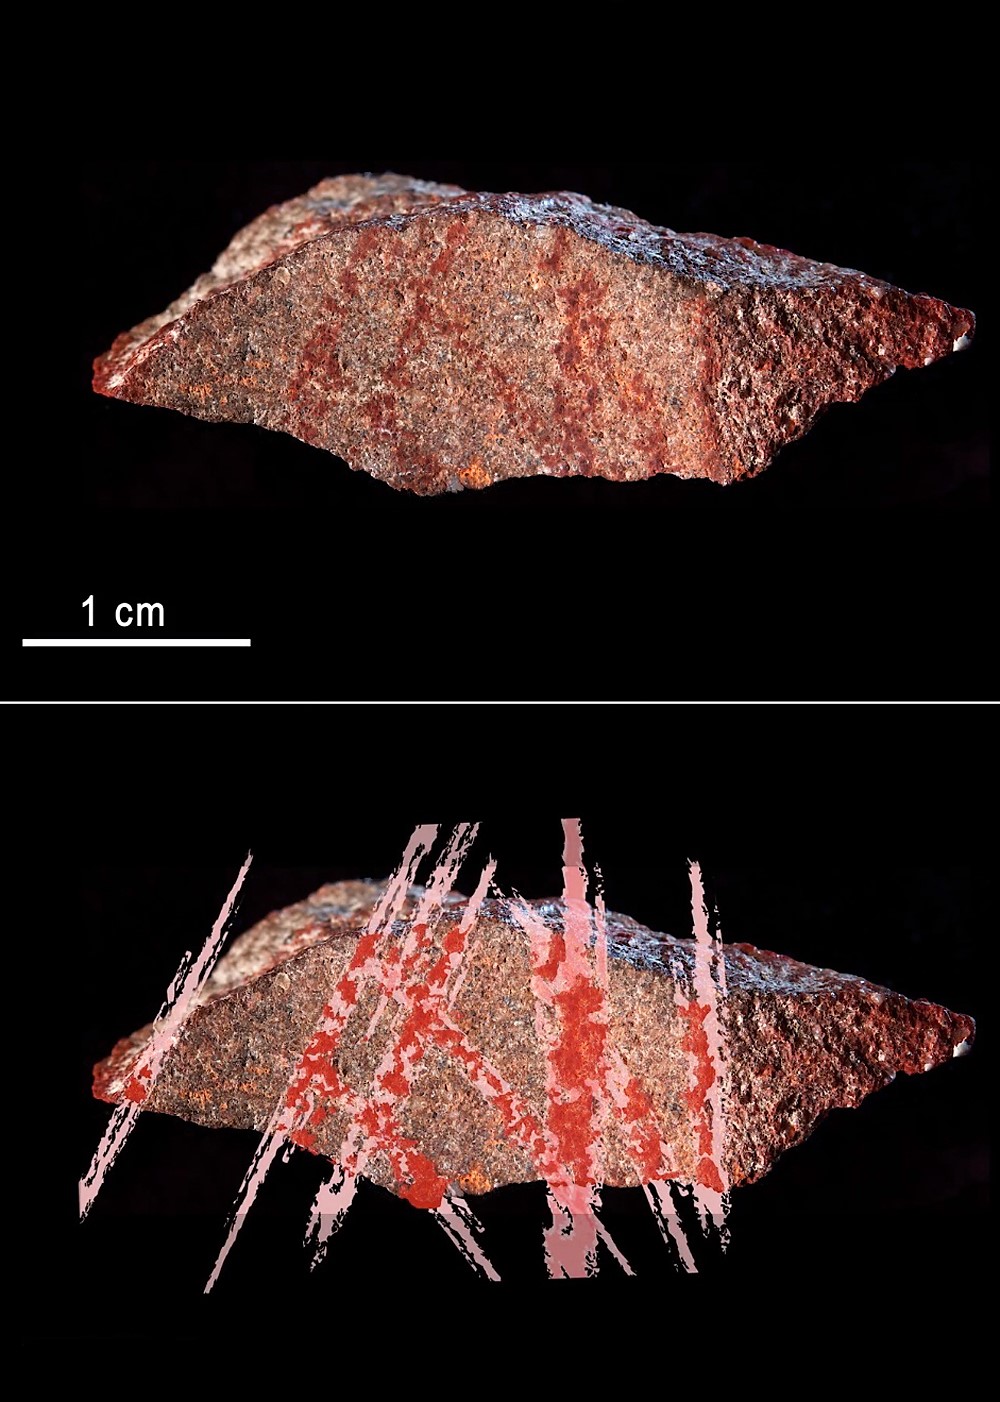 stone flake discovered South Africa researchers oldest known drawing by Homo sapiens